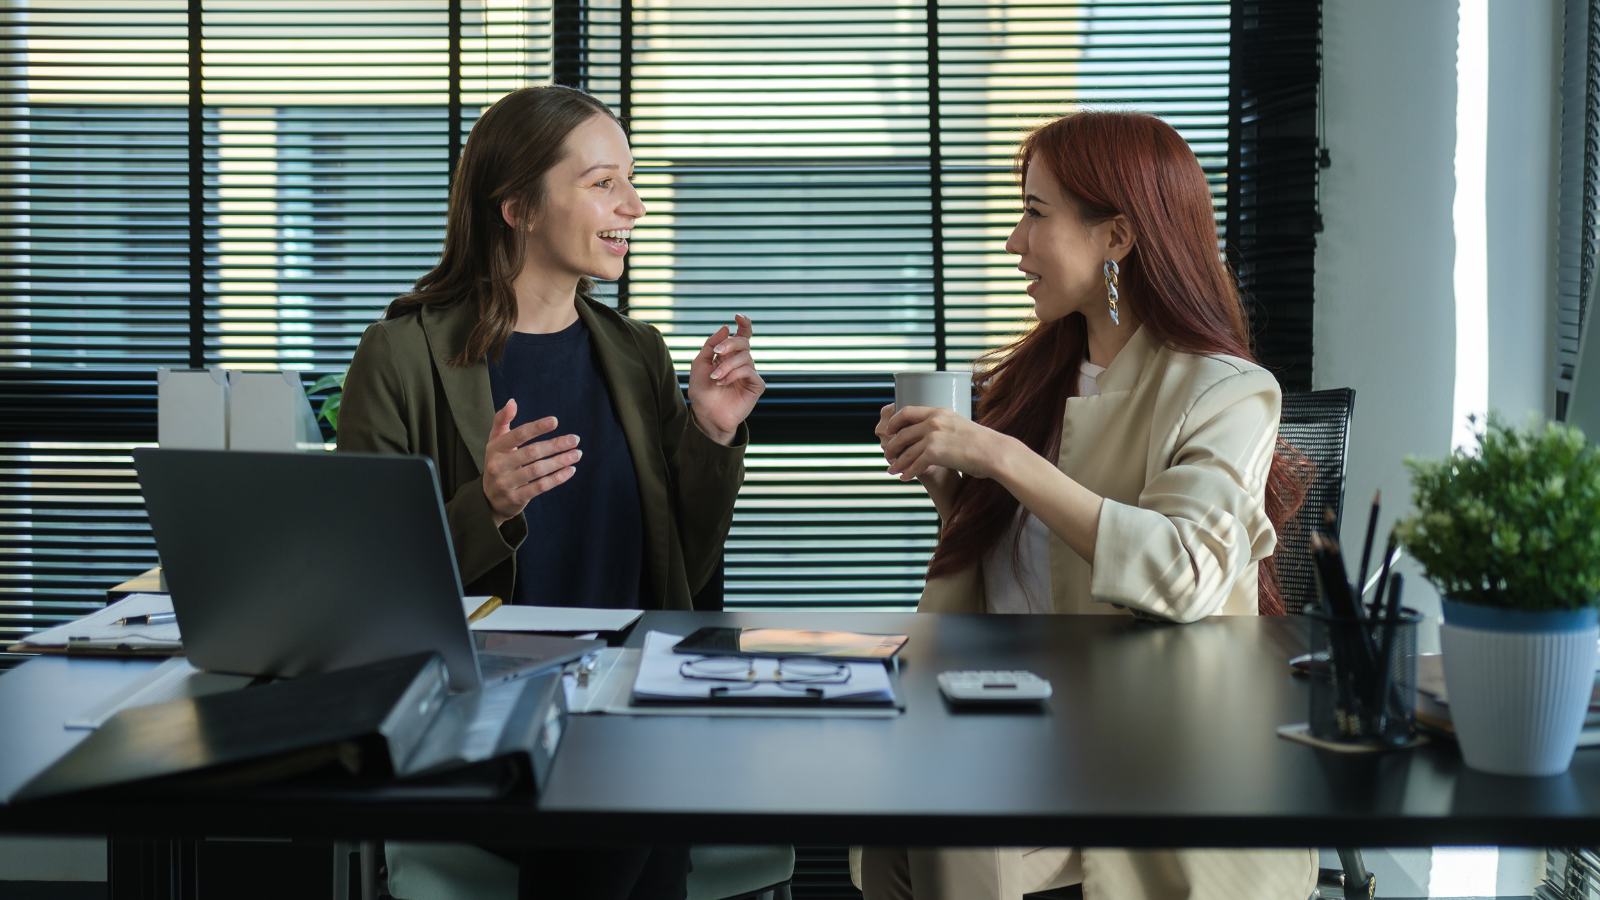 two women co-workers happily having a conversation